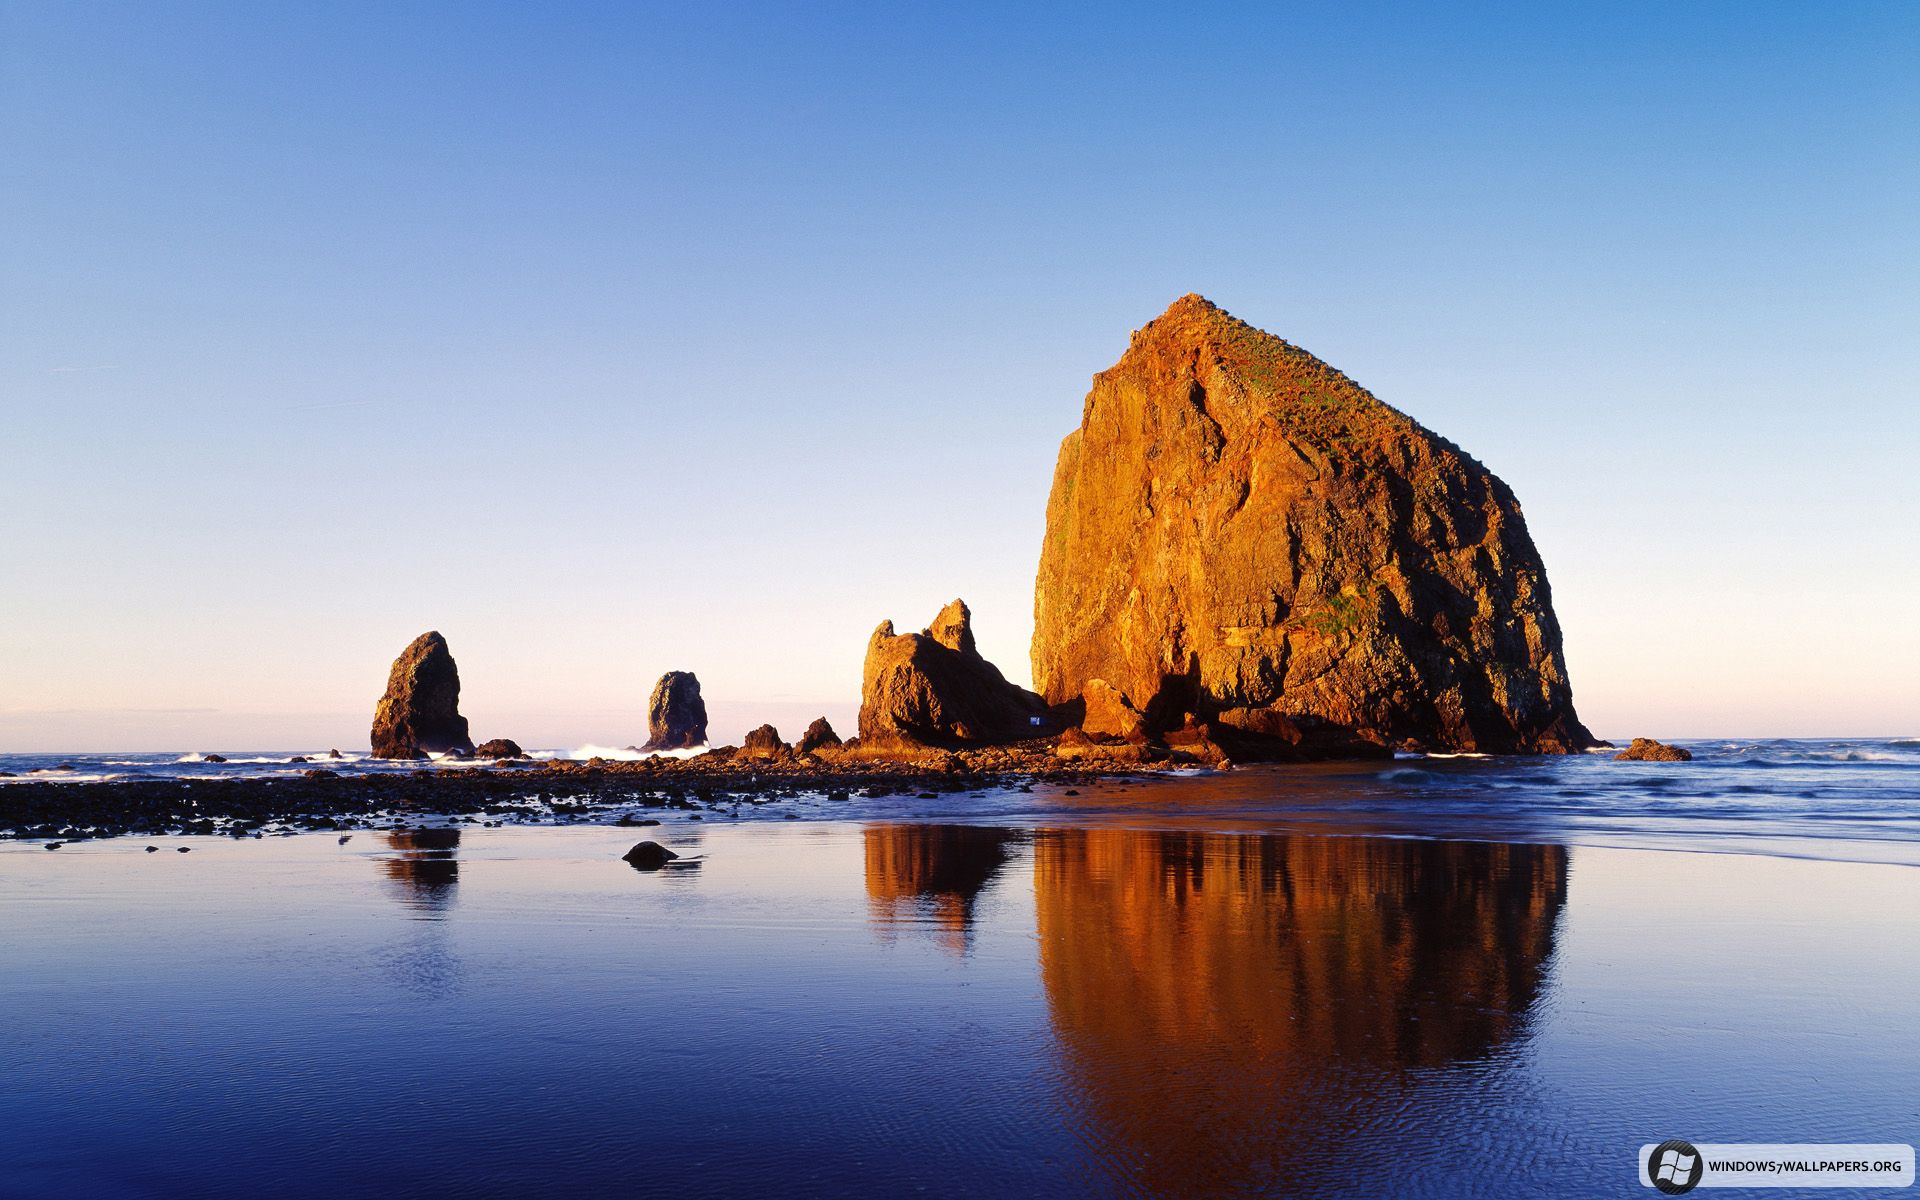 Windows 7 Cannon Beach, themes, build, 1920x1200 HD Wallpaper and other